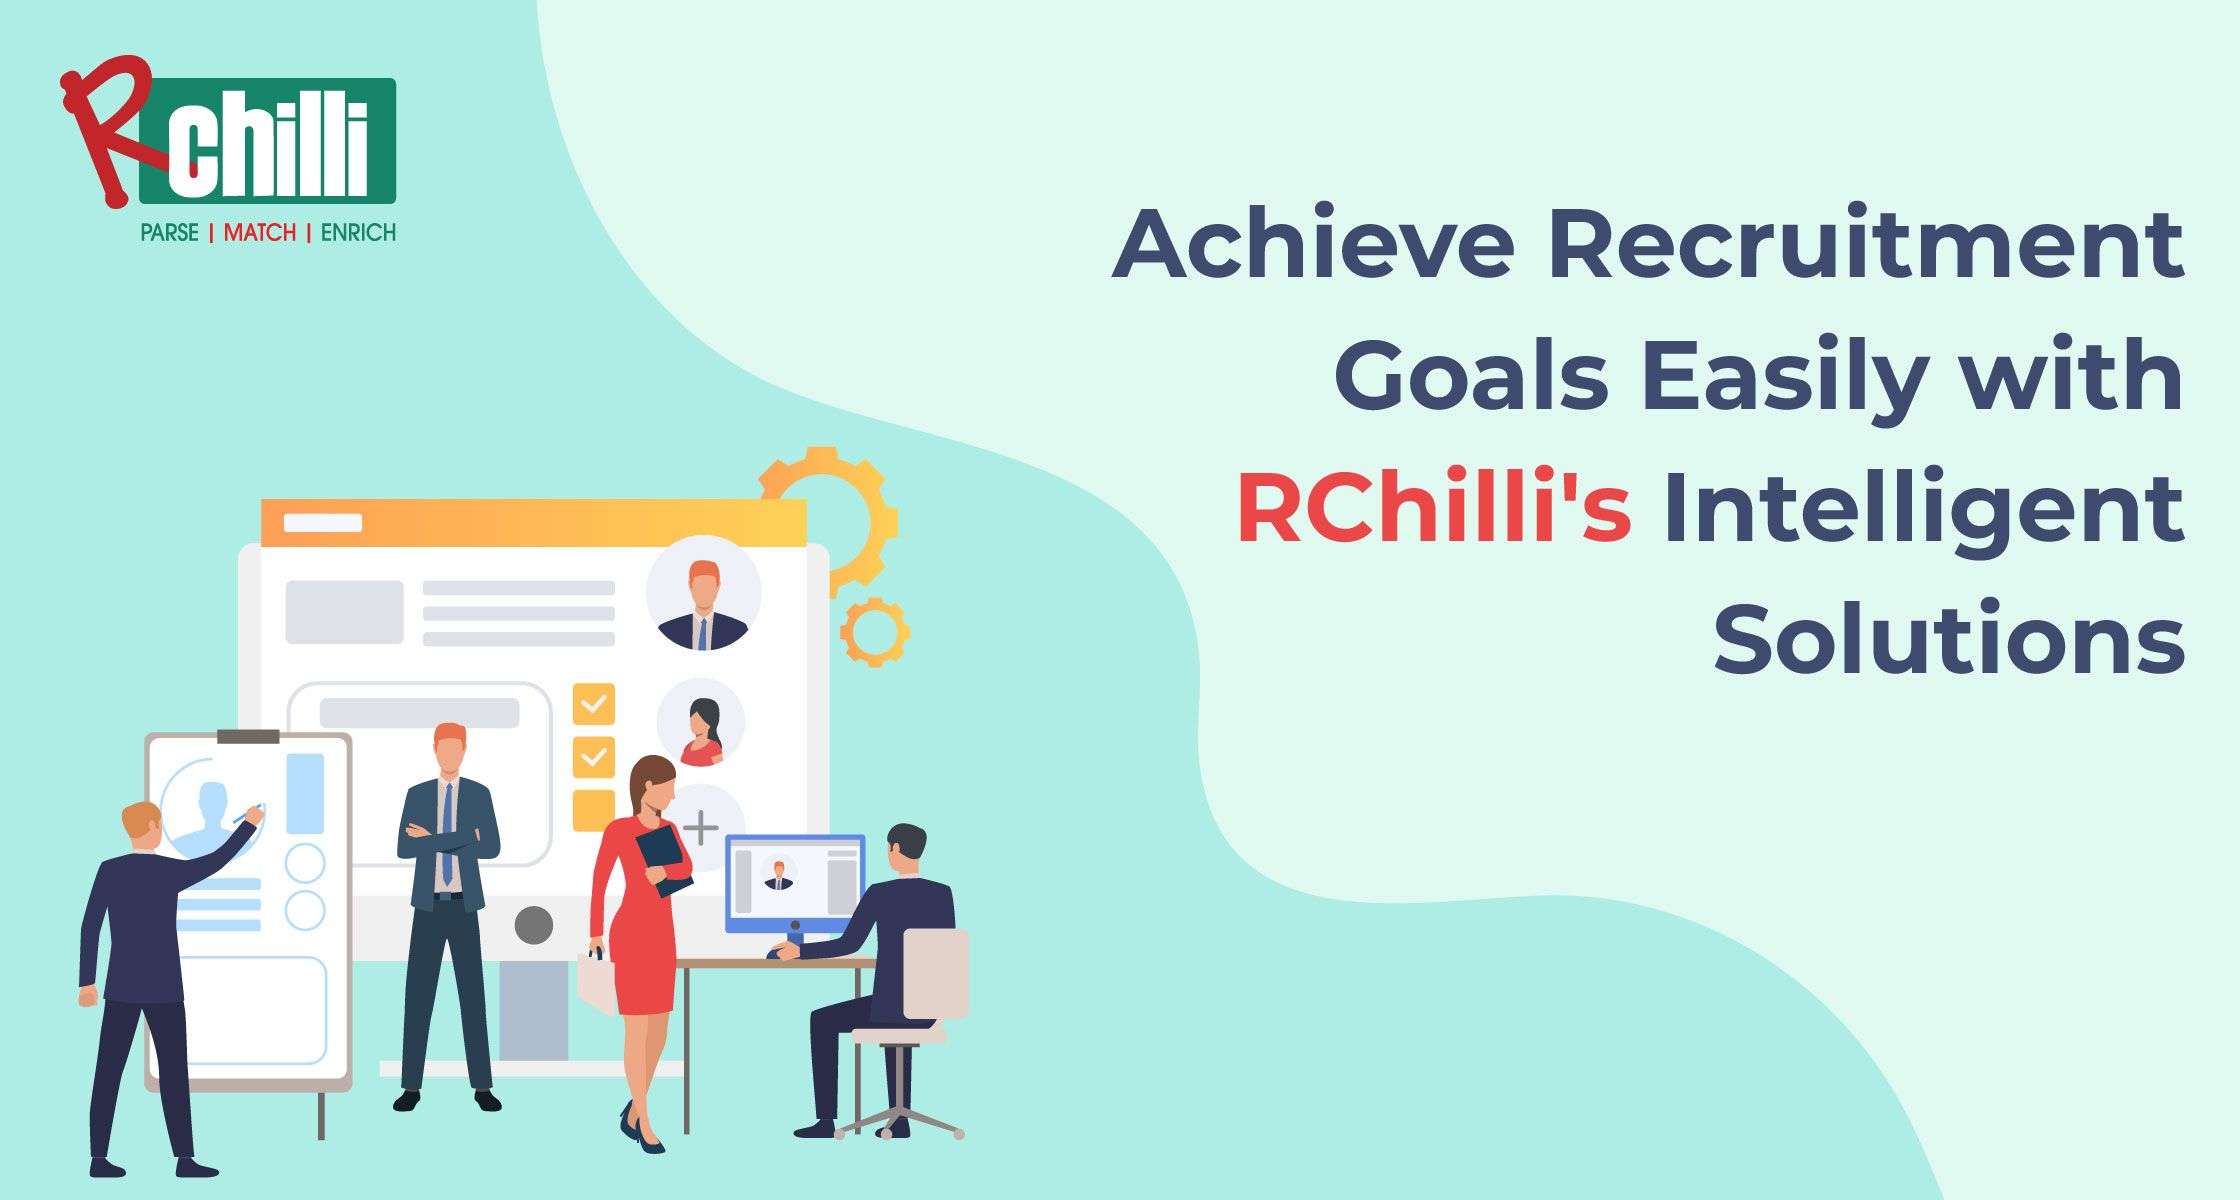 Job boards Simplify Their Recruitment with RChillis Intelligent Solutions